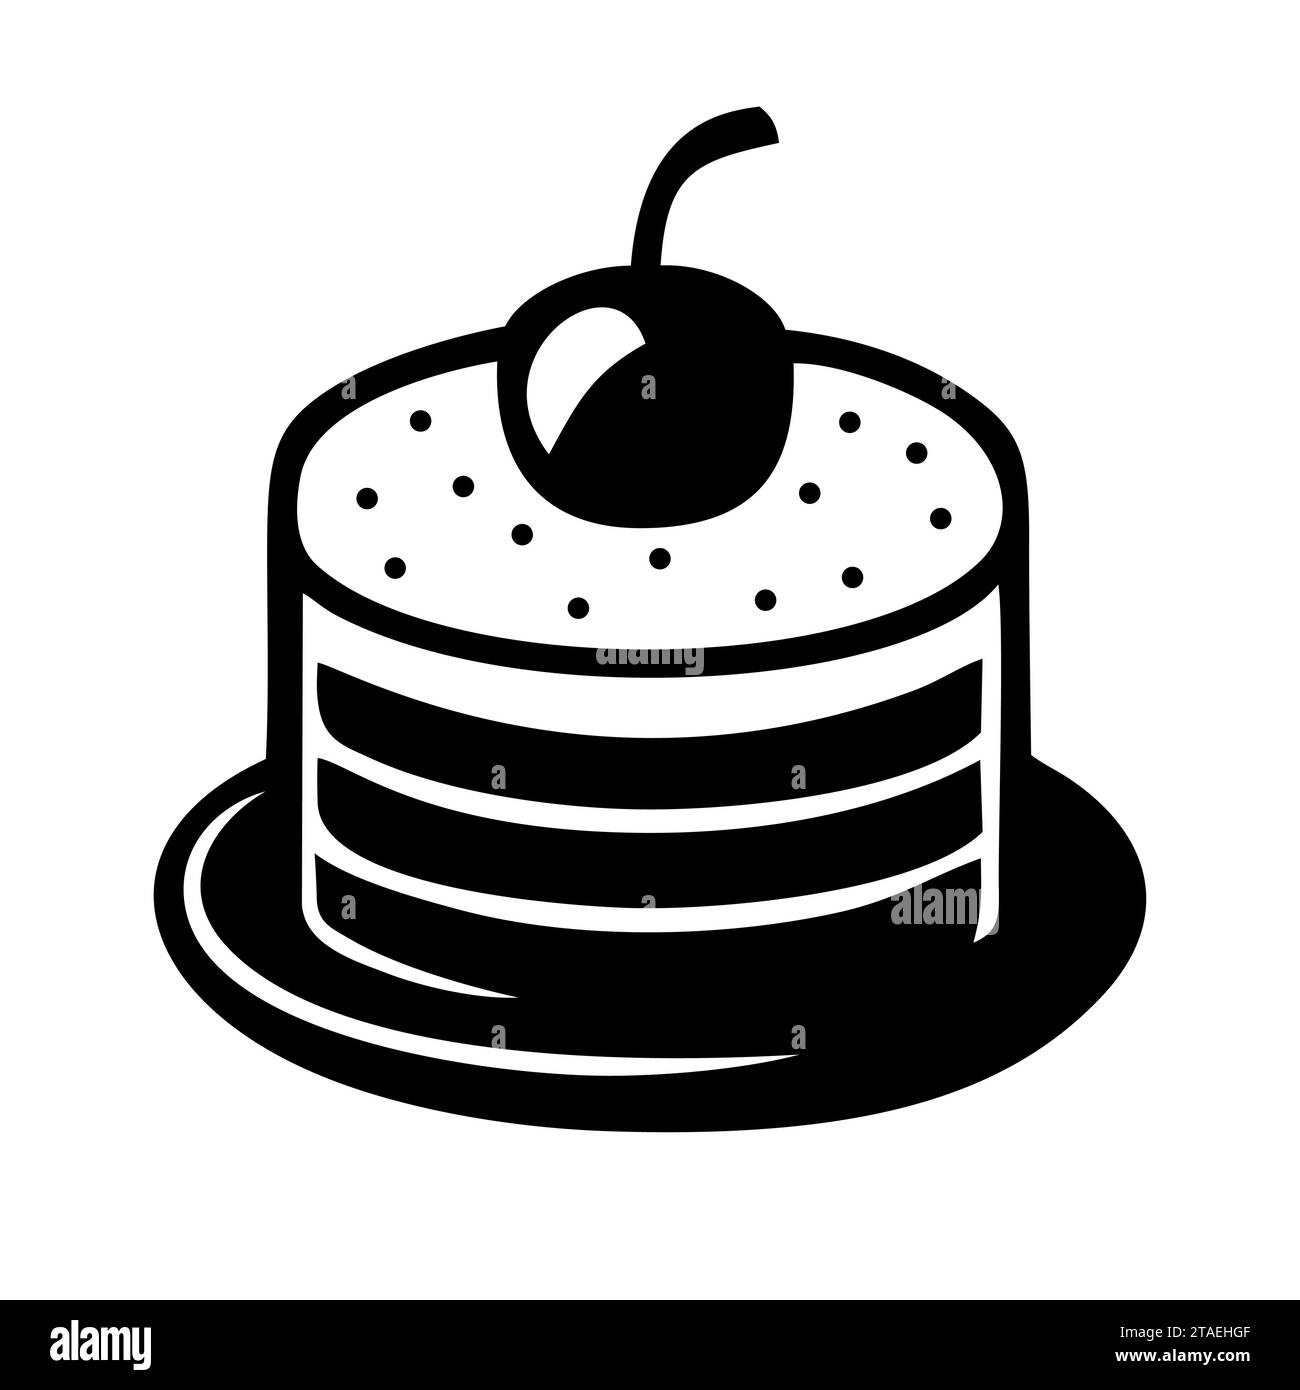 Cake dessert with cherry black icon, sweet food. Simple delicious symbol. Sweet birthday cake, Bakery cupcake isolated on white. Vector illustration. Stock Vector